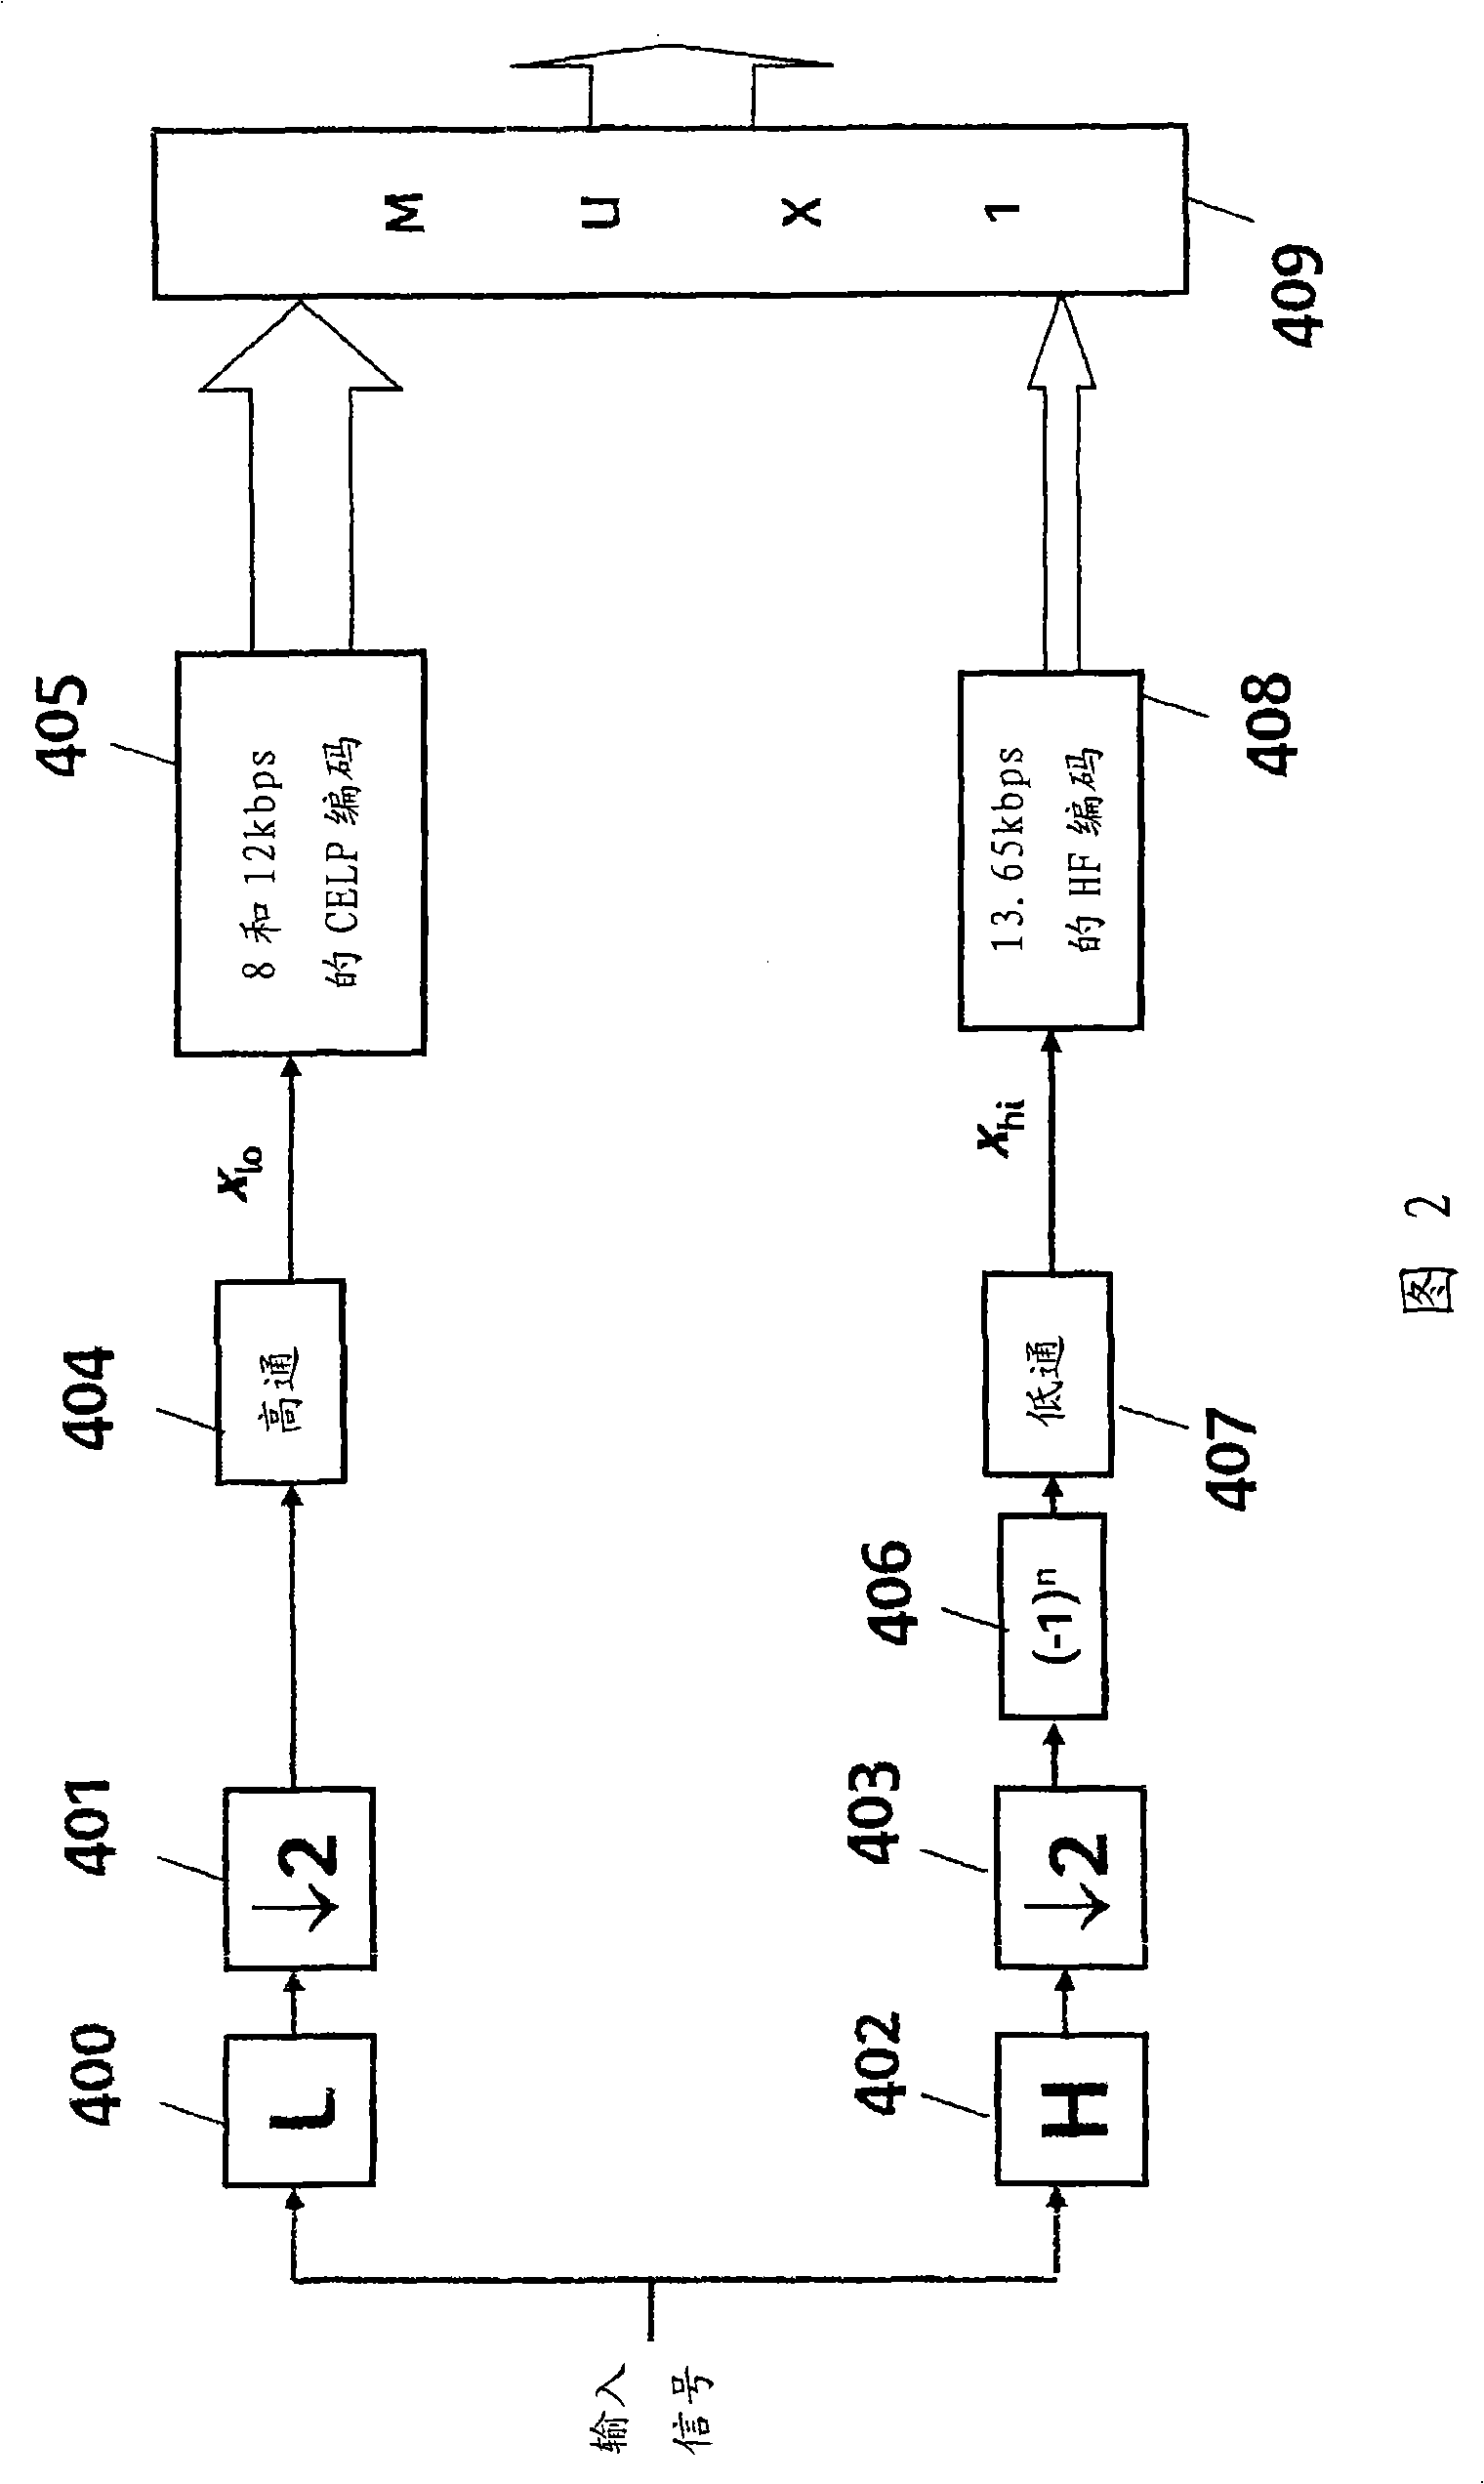 Method for post-processing a signal in an audio decoder